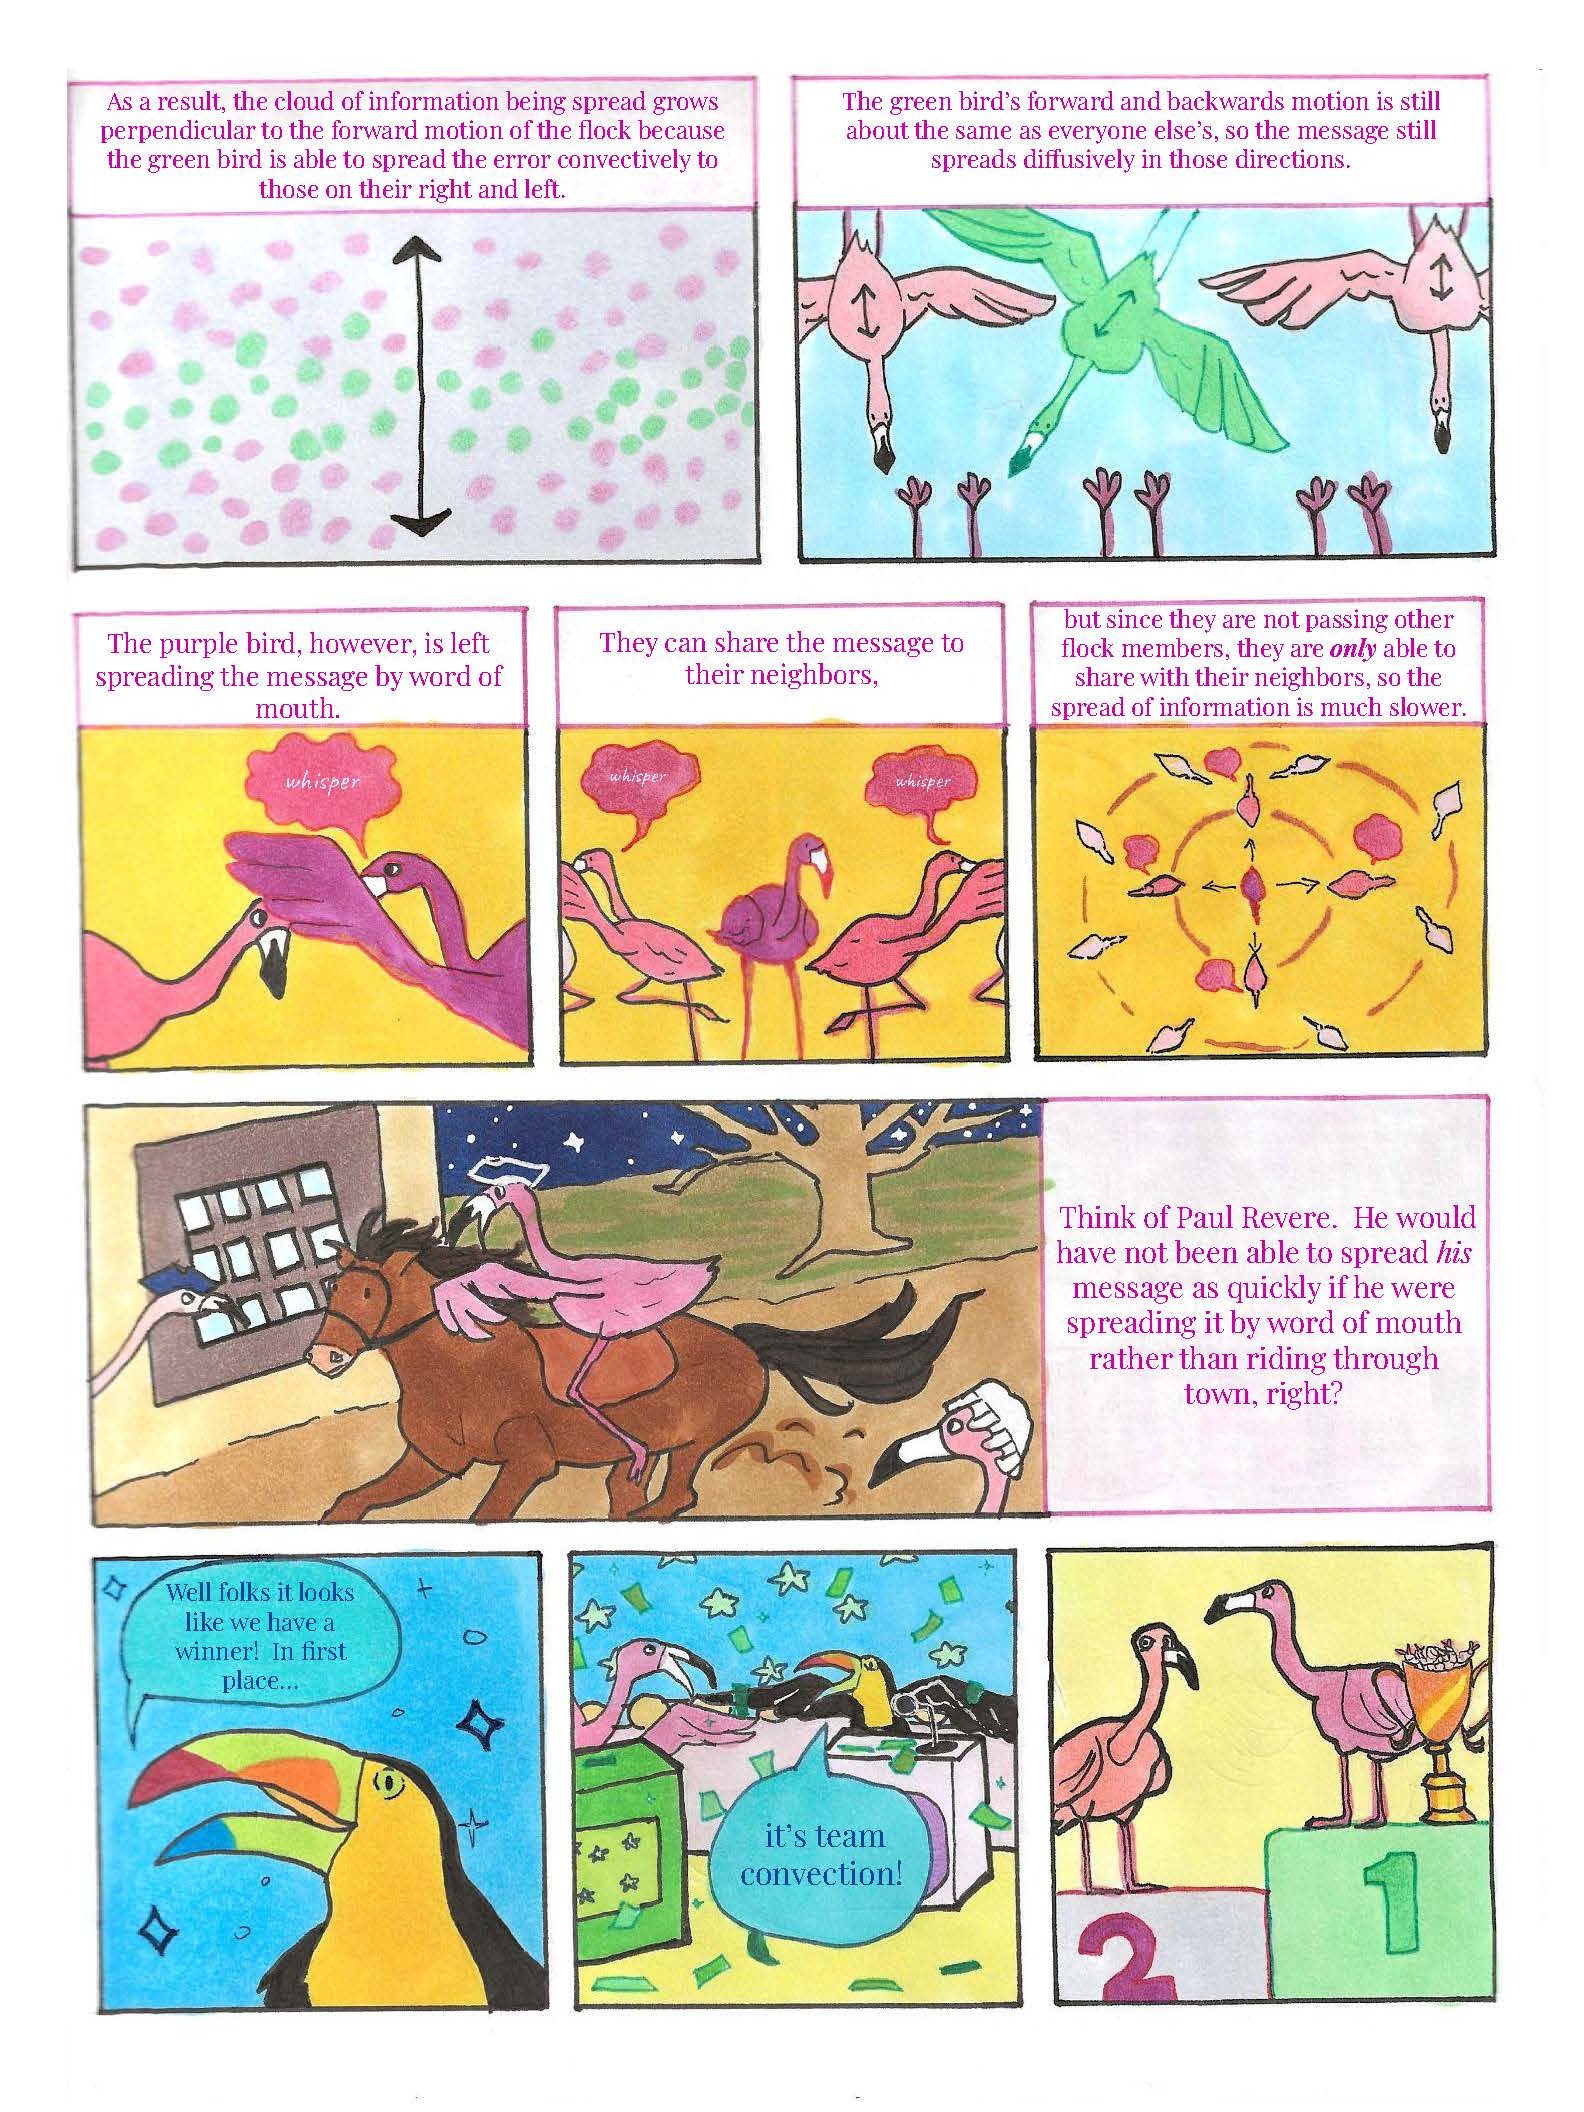 Flocking birds and active matter page 8